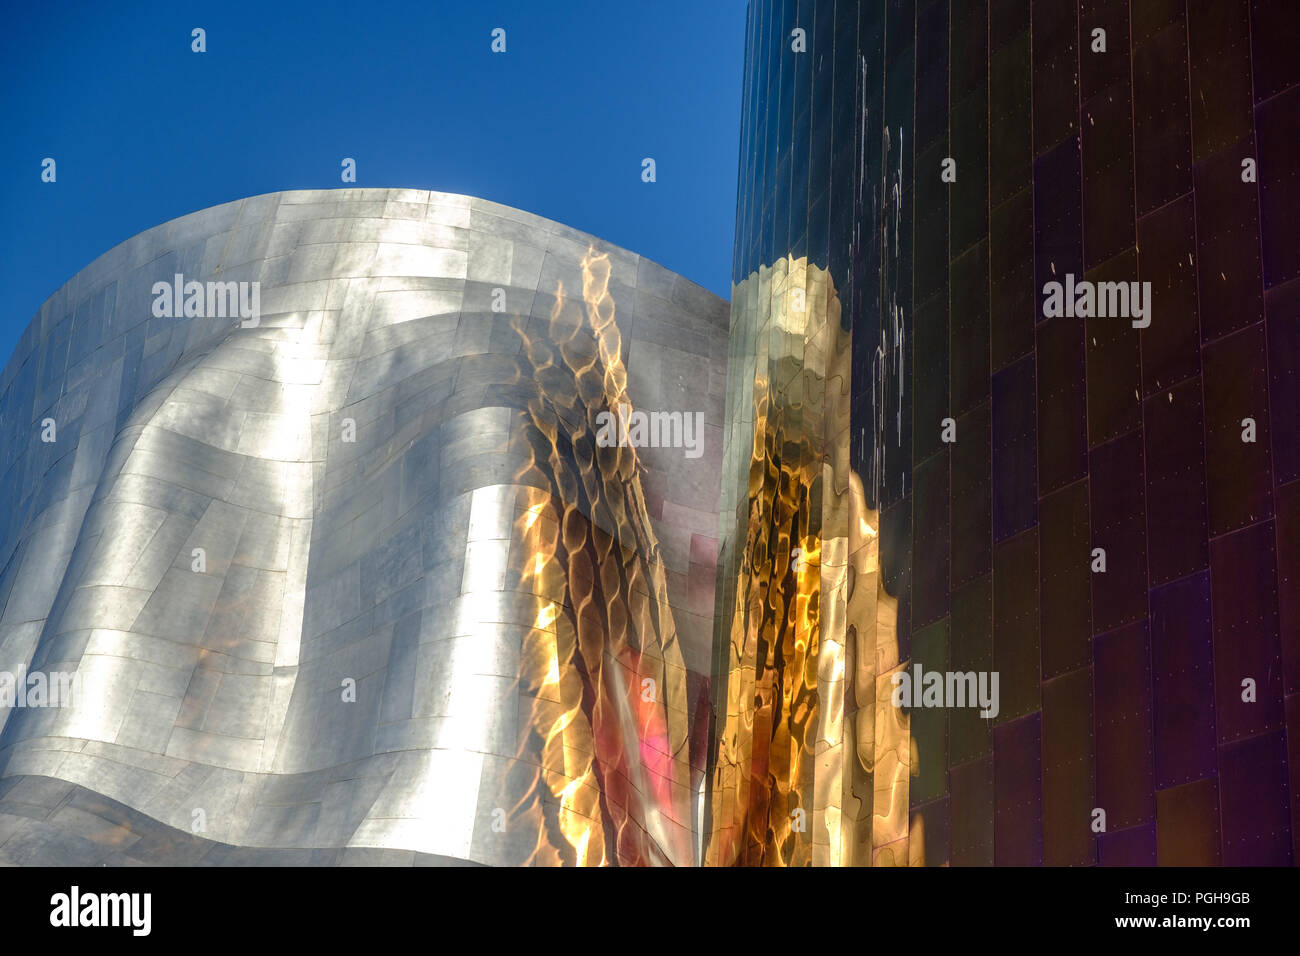 EMP Museum celebrating American popular music and culture, Seattle Center, seen through sculpture in Olympic Sculpture park, Seattle, USA Stock Photo